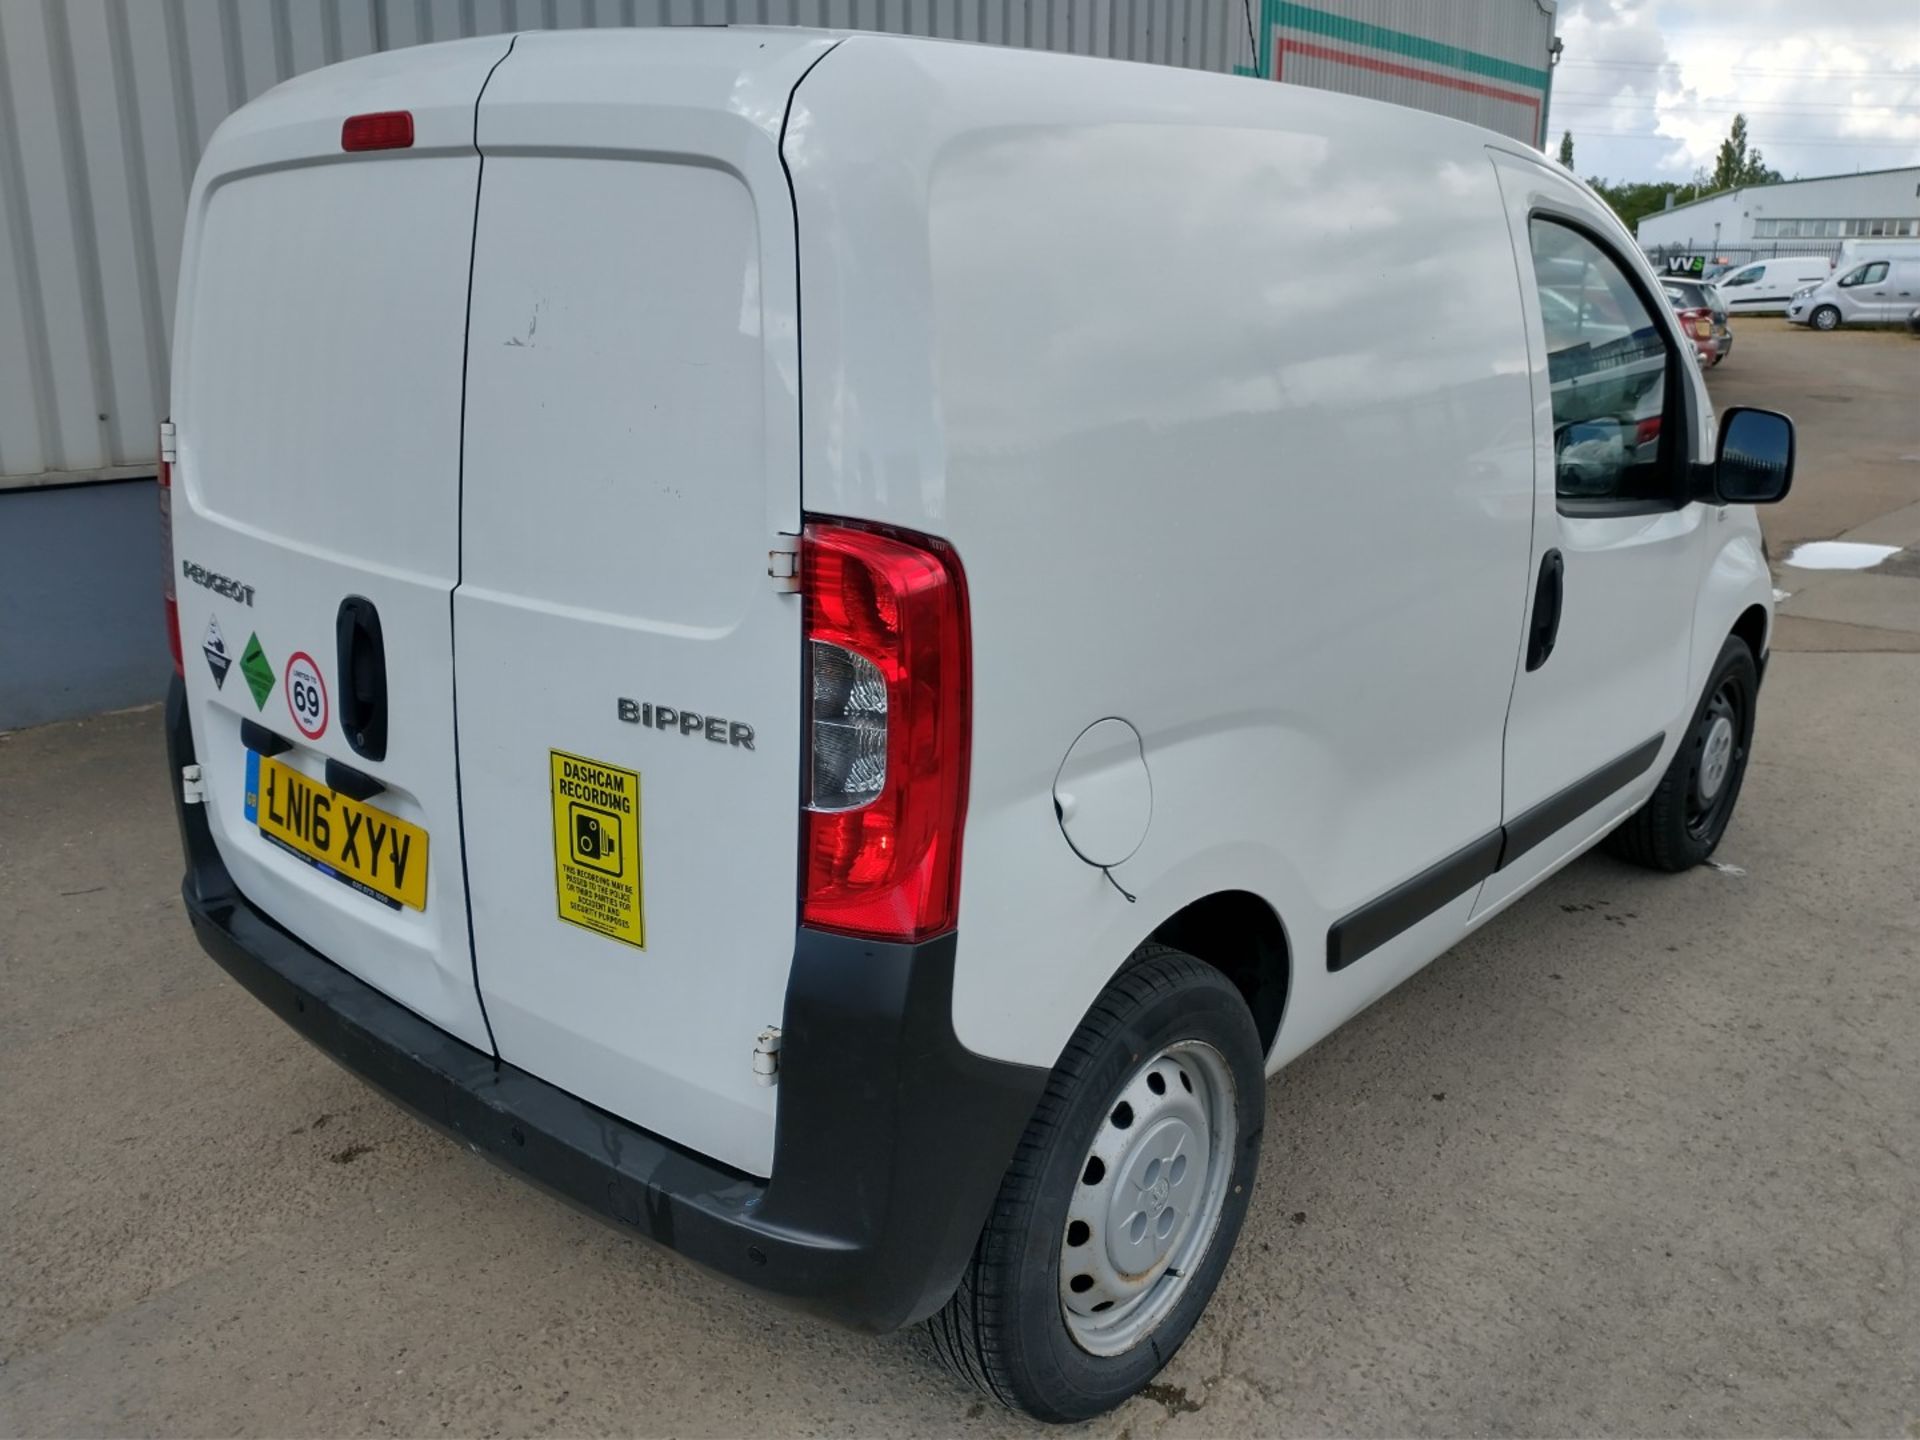 2016 Peugeot Bipper S Hdi Panel van - CL505 - Location: Corby - Image 3 of 15